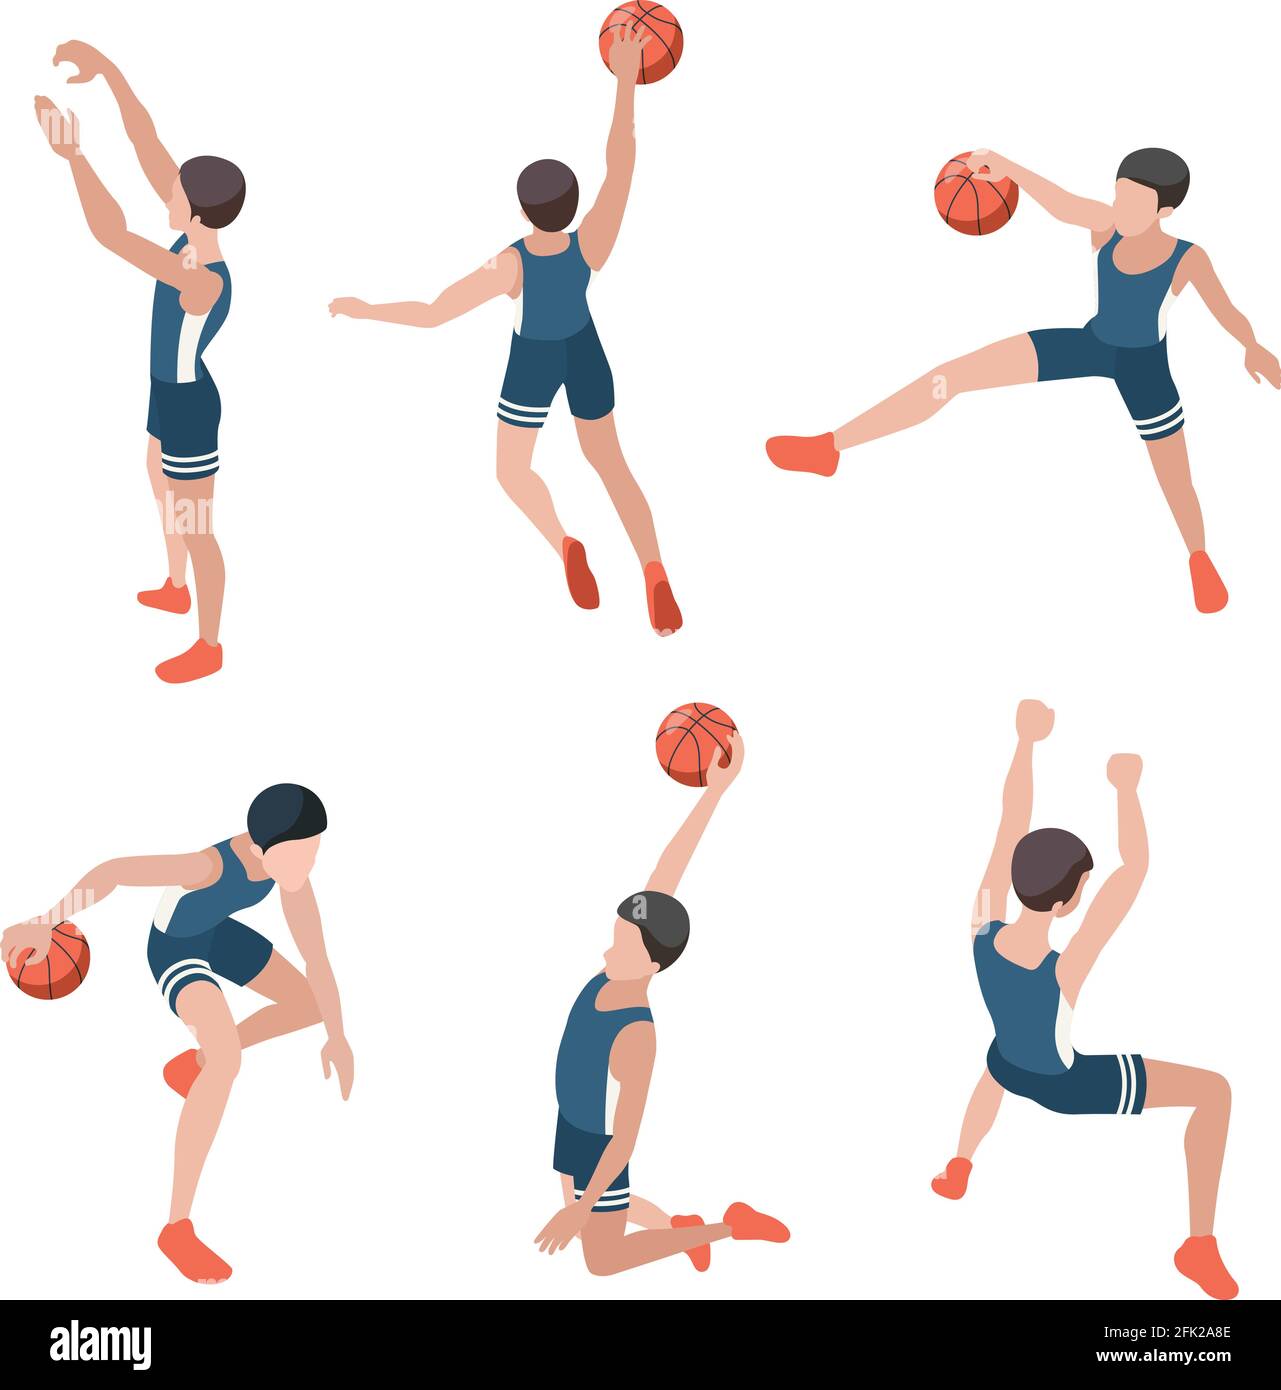 Basketball players. Sport athletes playing in active games with ball healthy lifestyle vector isometric people Stock Vector